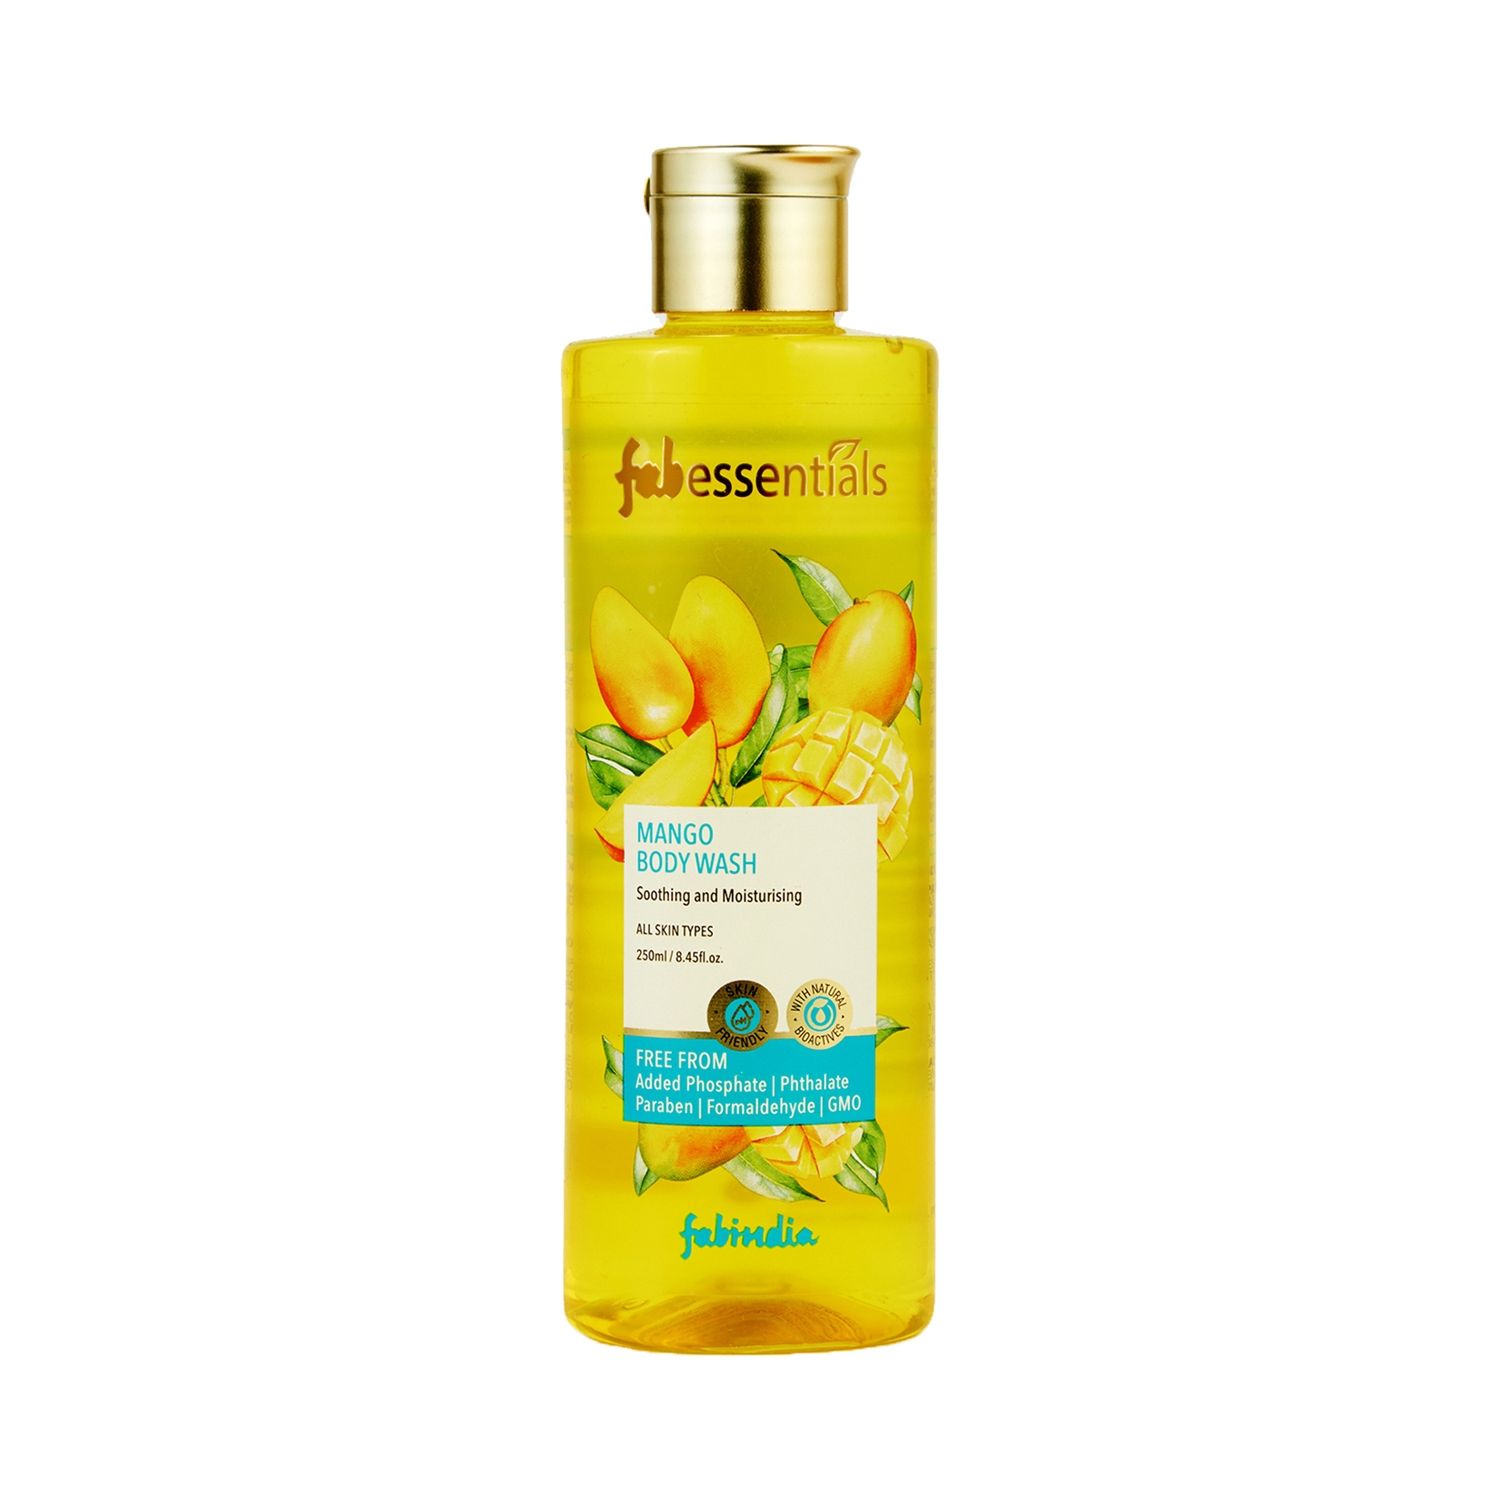 Fabessentials by Fabindia | Fabessentials by Fabindia Mango Body Wash With The Goodness Of Olive Oil (250ml)